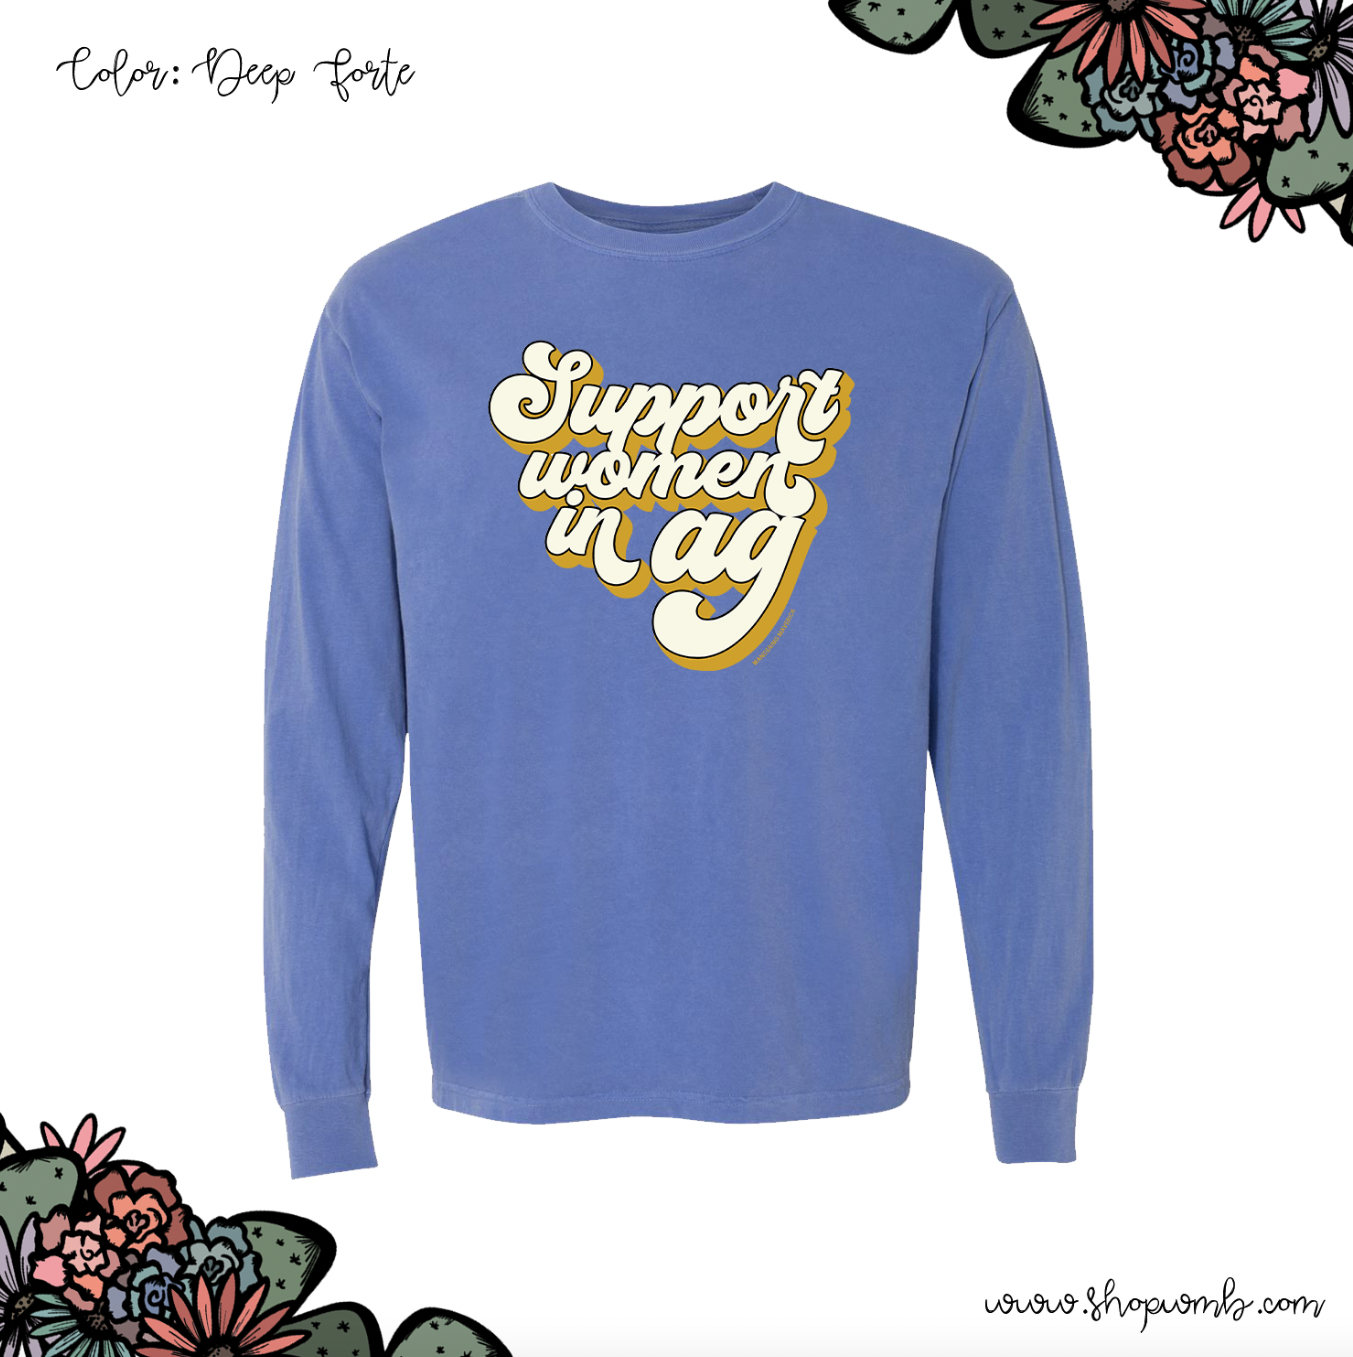 Retro Support Women In Ag Gold LONG SLEEVE T-Shirt (S-3XL) - Multiple Colors!